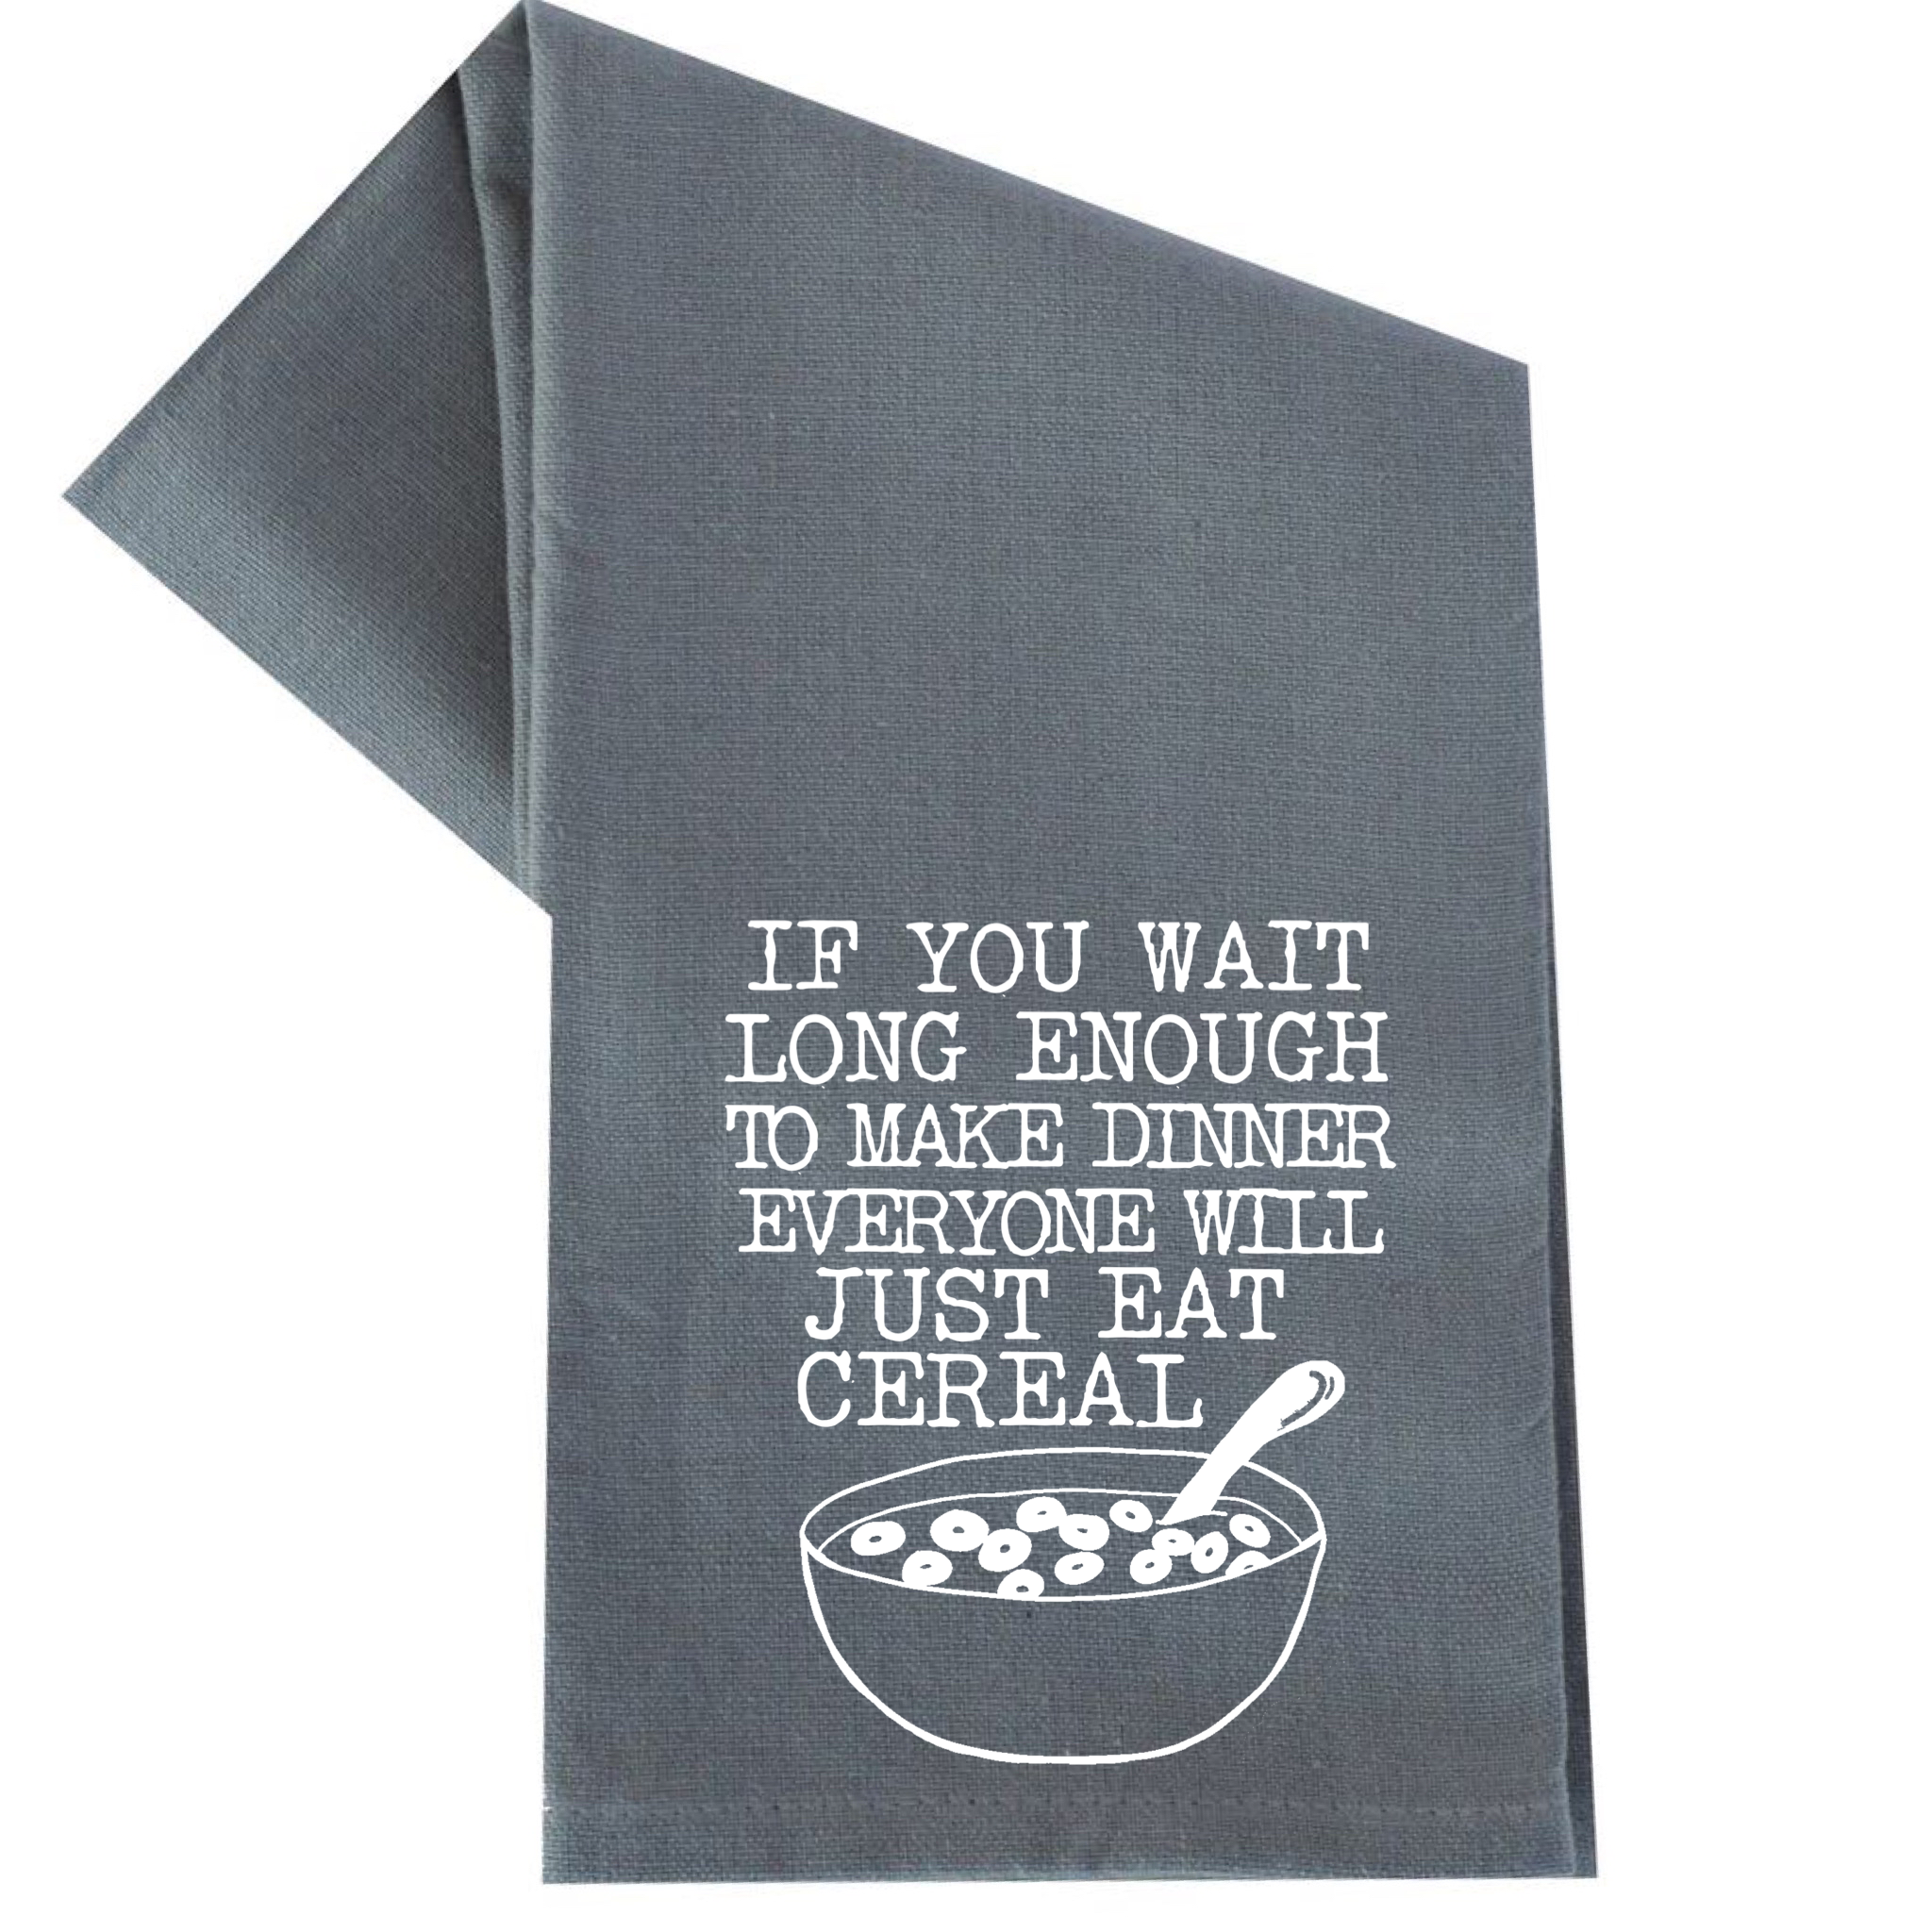 IF YOU WAIT LONG ENOUGHT TO MAKE DINNER TOWEL